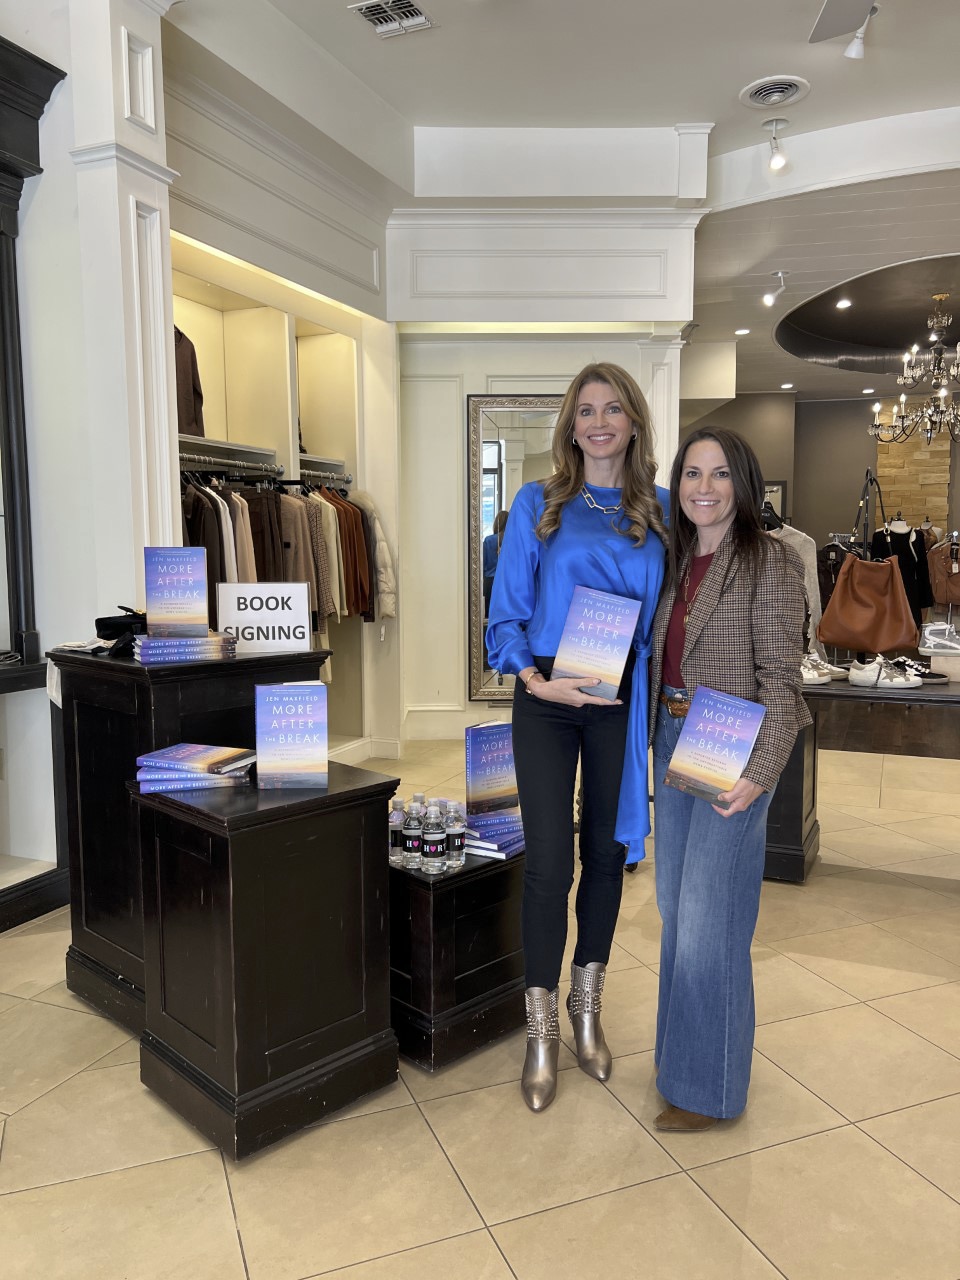 Jen in blue top and gold boots with a book signing attendee